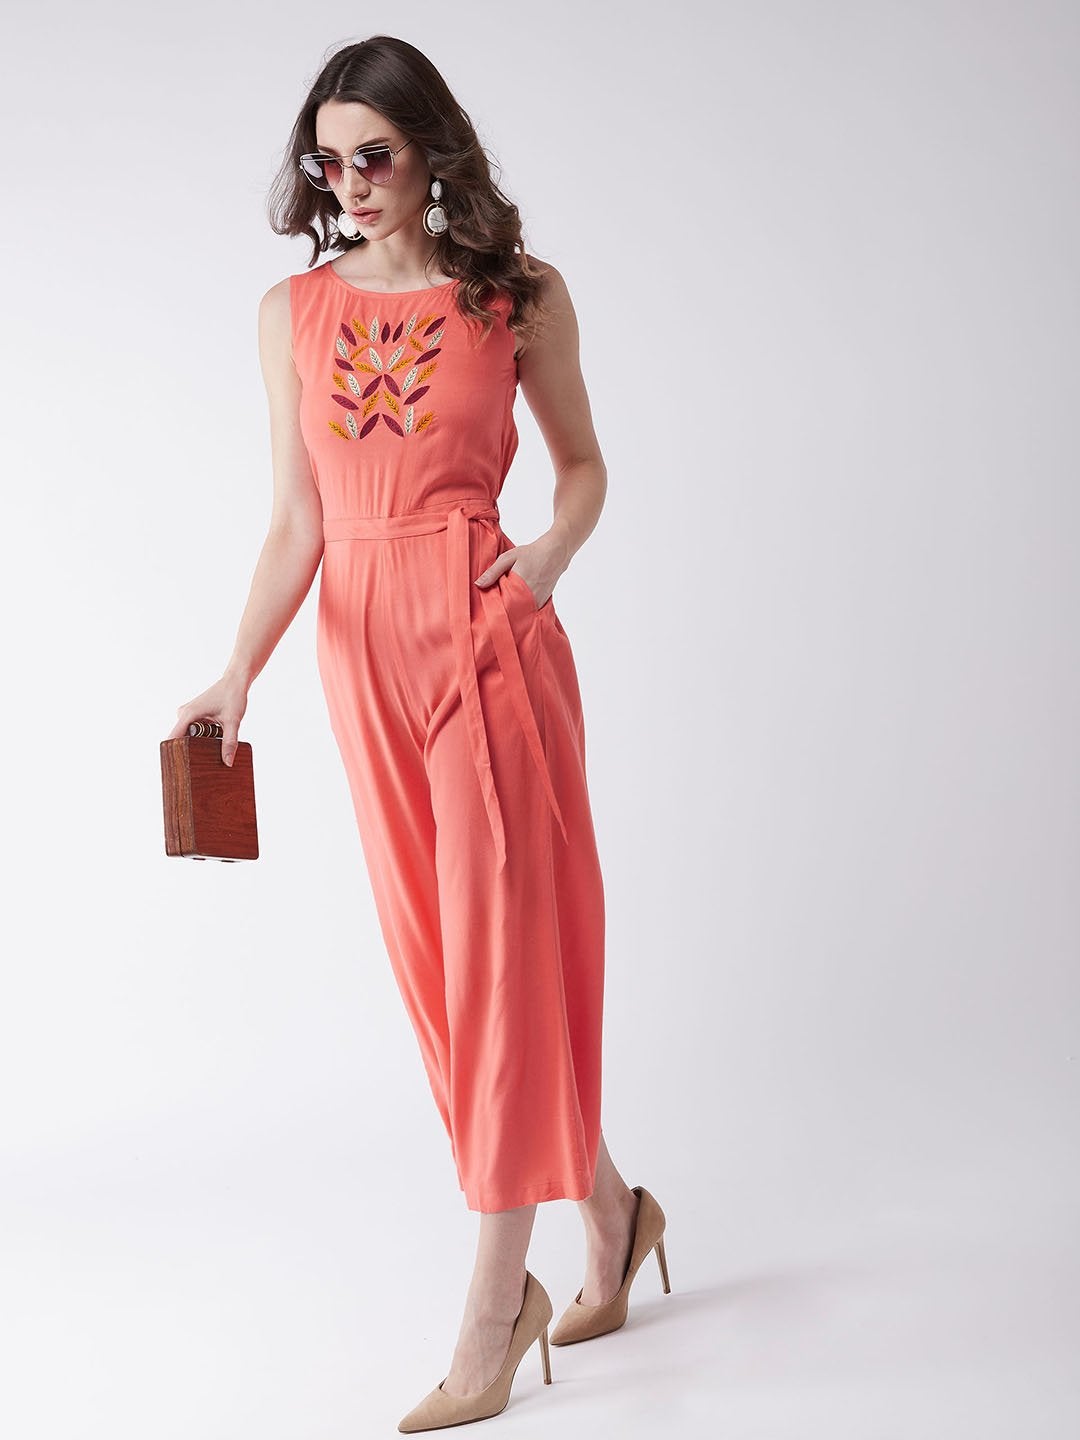 Women's Coral Embroidered Sleeveless Jumpsuit - Pannkh